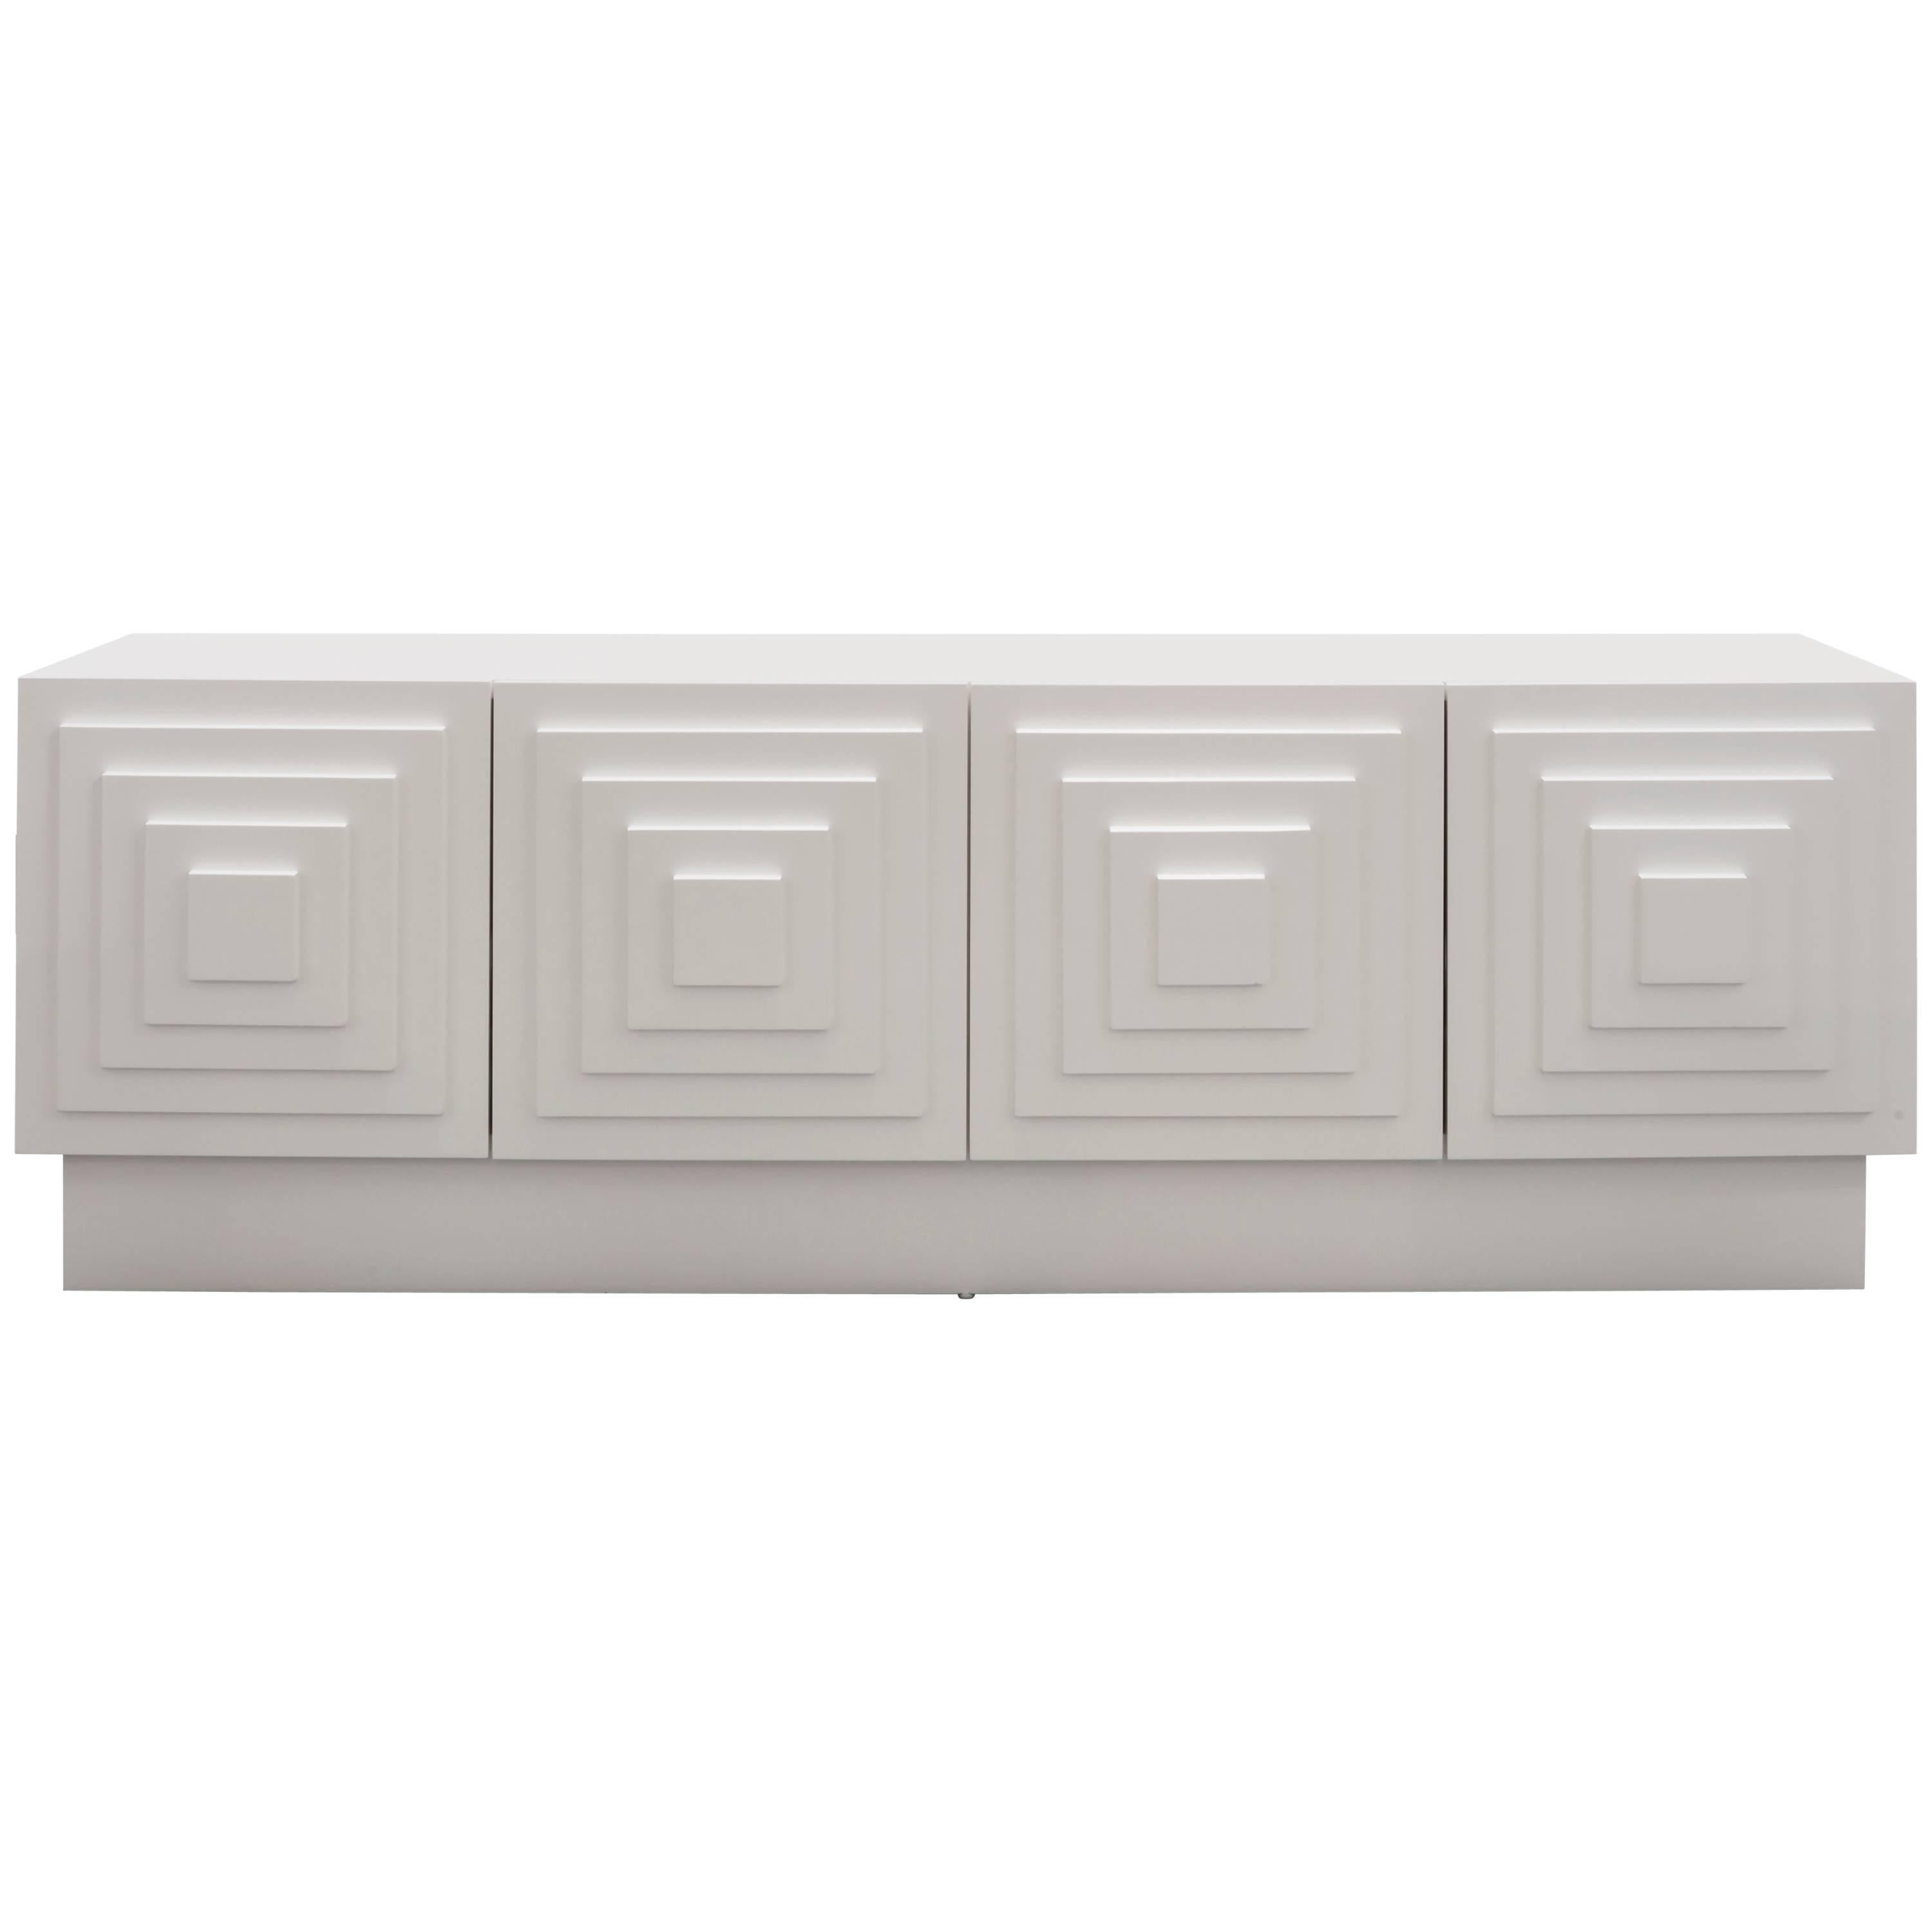 GAULTIER MEDIA CREDENZA - Modern Geometric Cabinet in White Lacquer